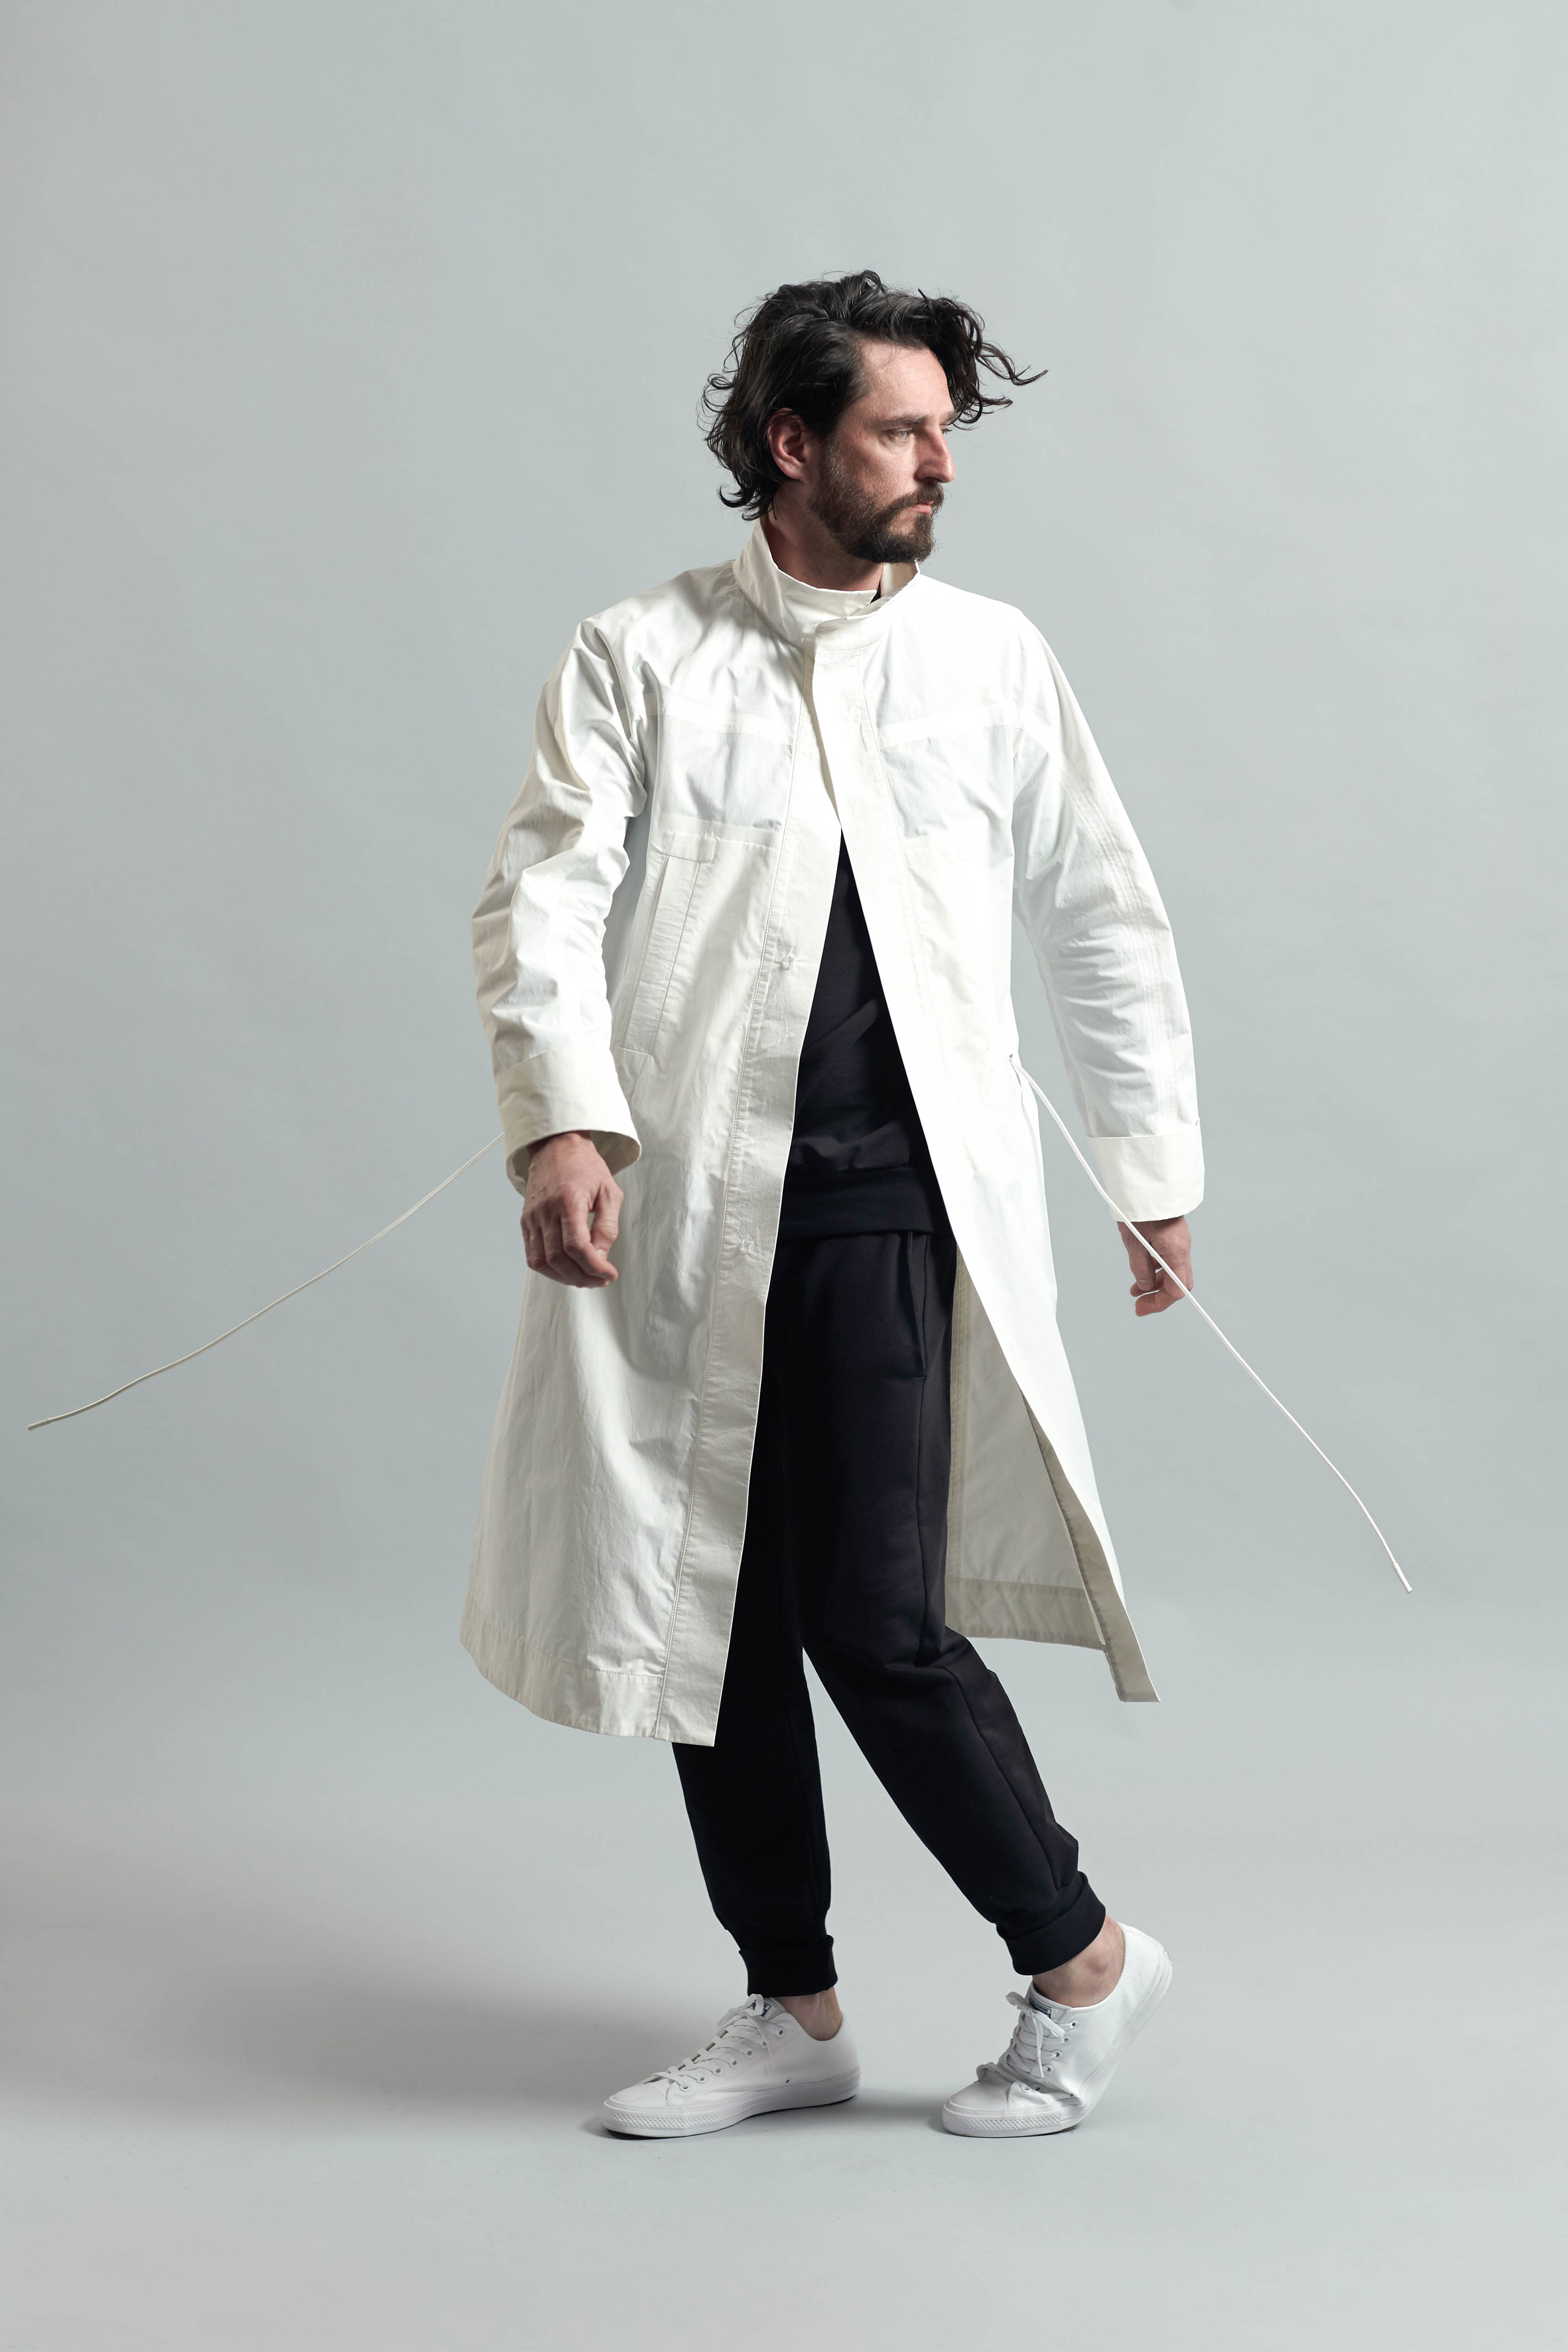 the-new-habit-clothes-inspired-dominican-monks-byborre-design-fashion_dezeen_2364_col_12